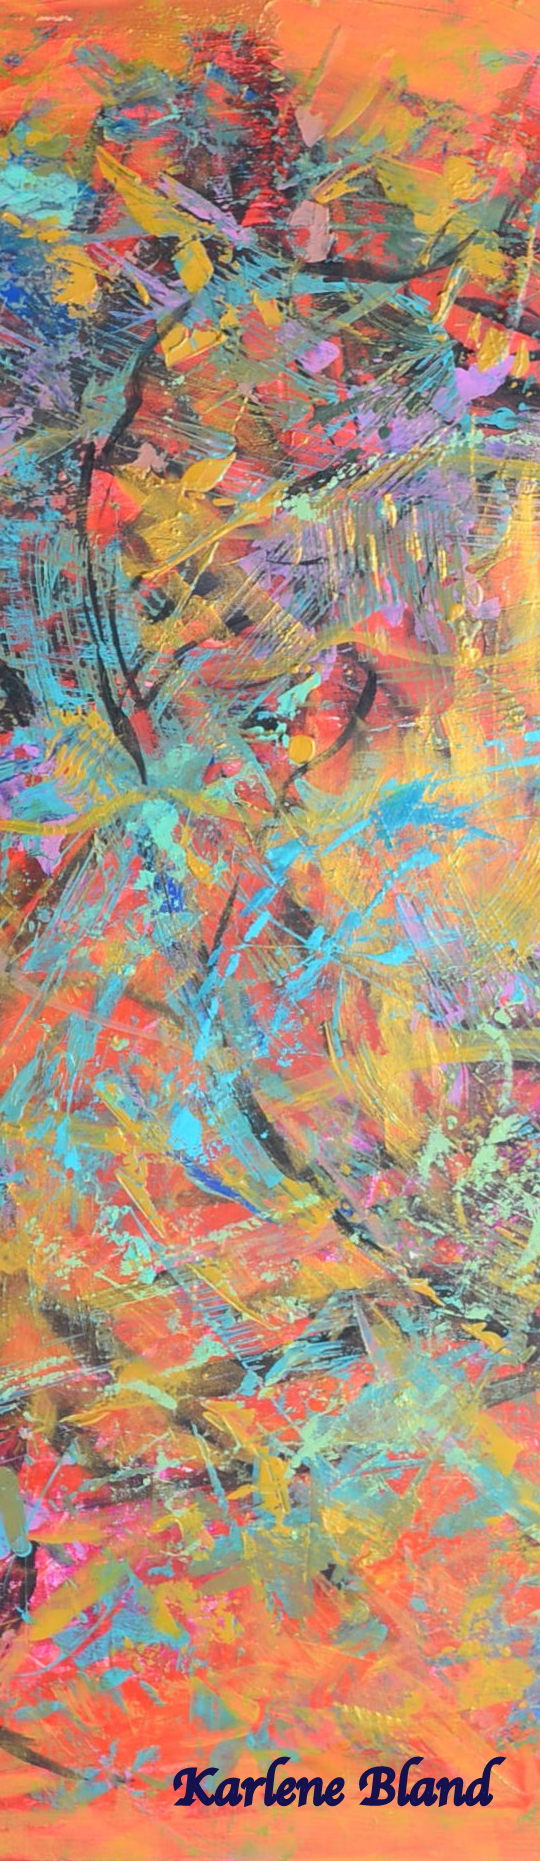 Karlene Bland Abstract Expressionism Painting with Explosive yellow, orange , greens and turquoise